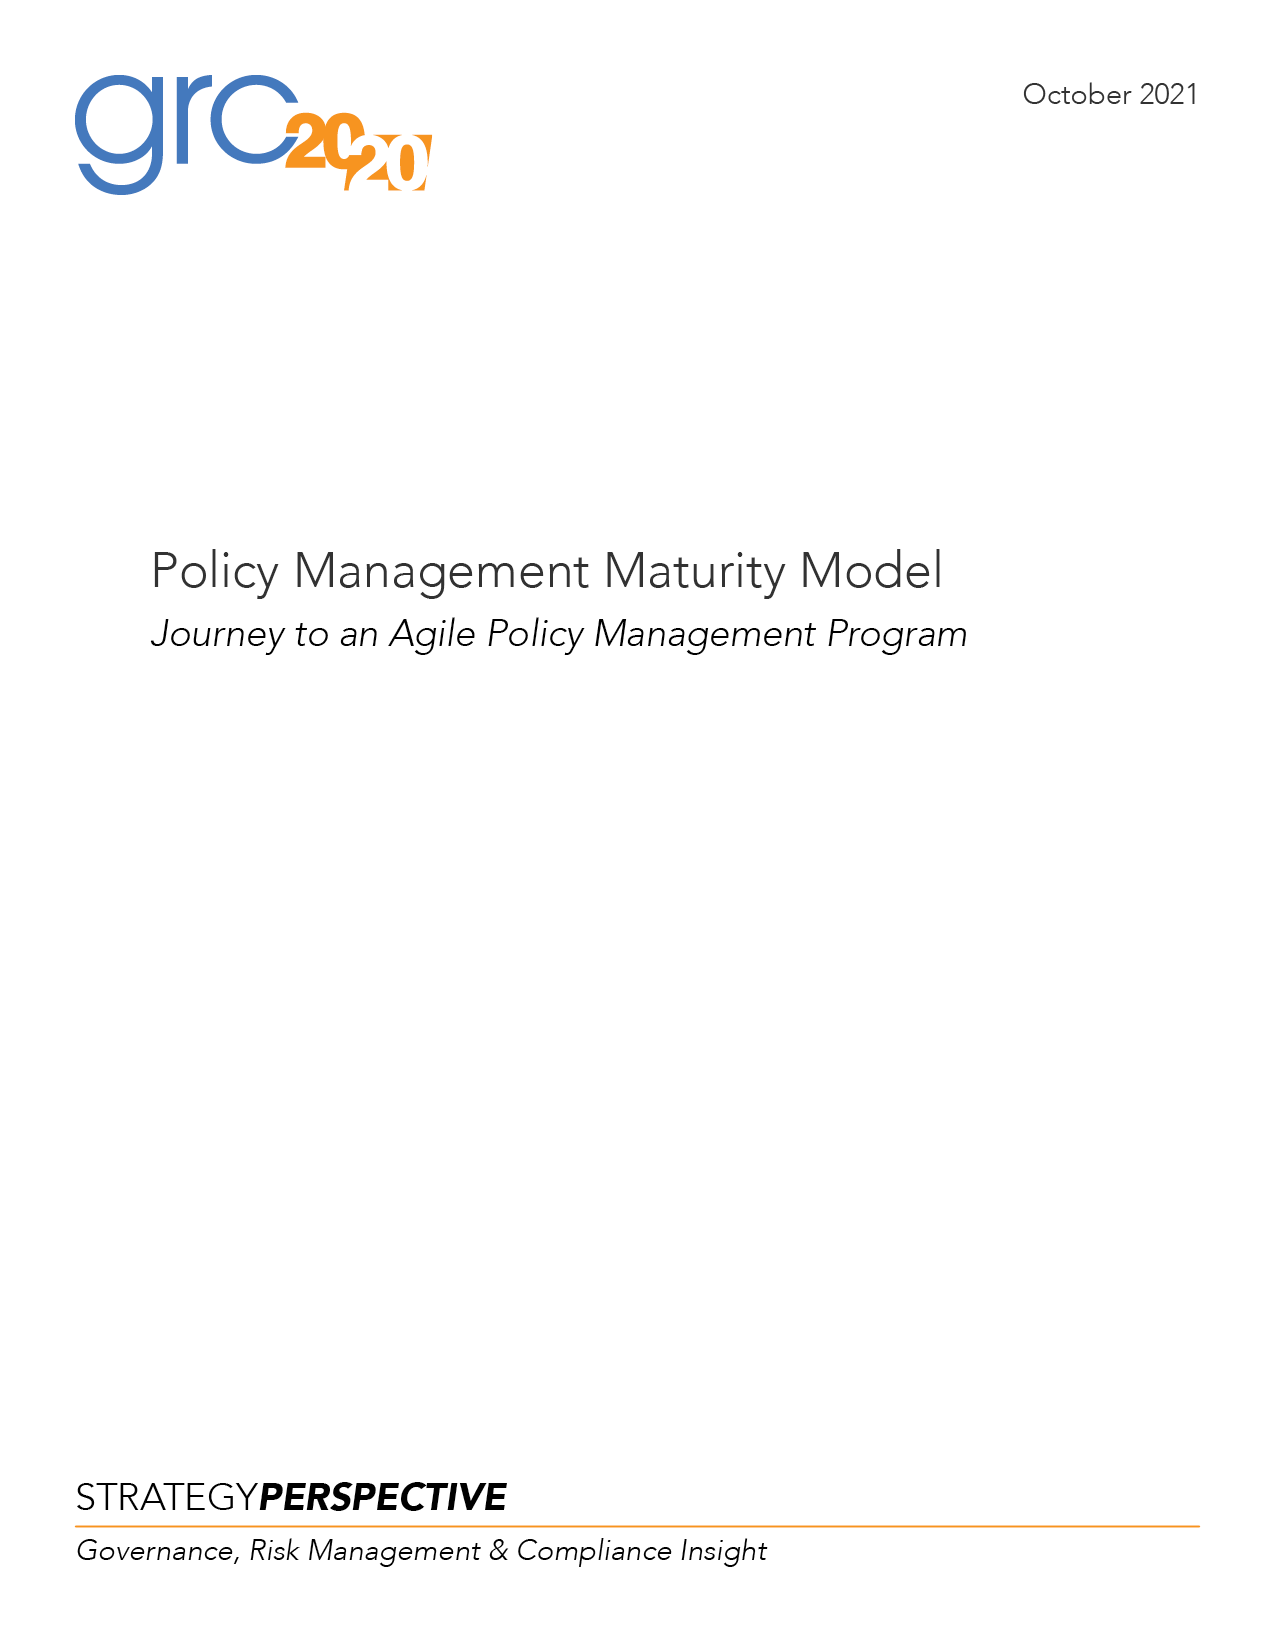 Policy Management, Products